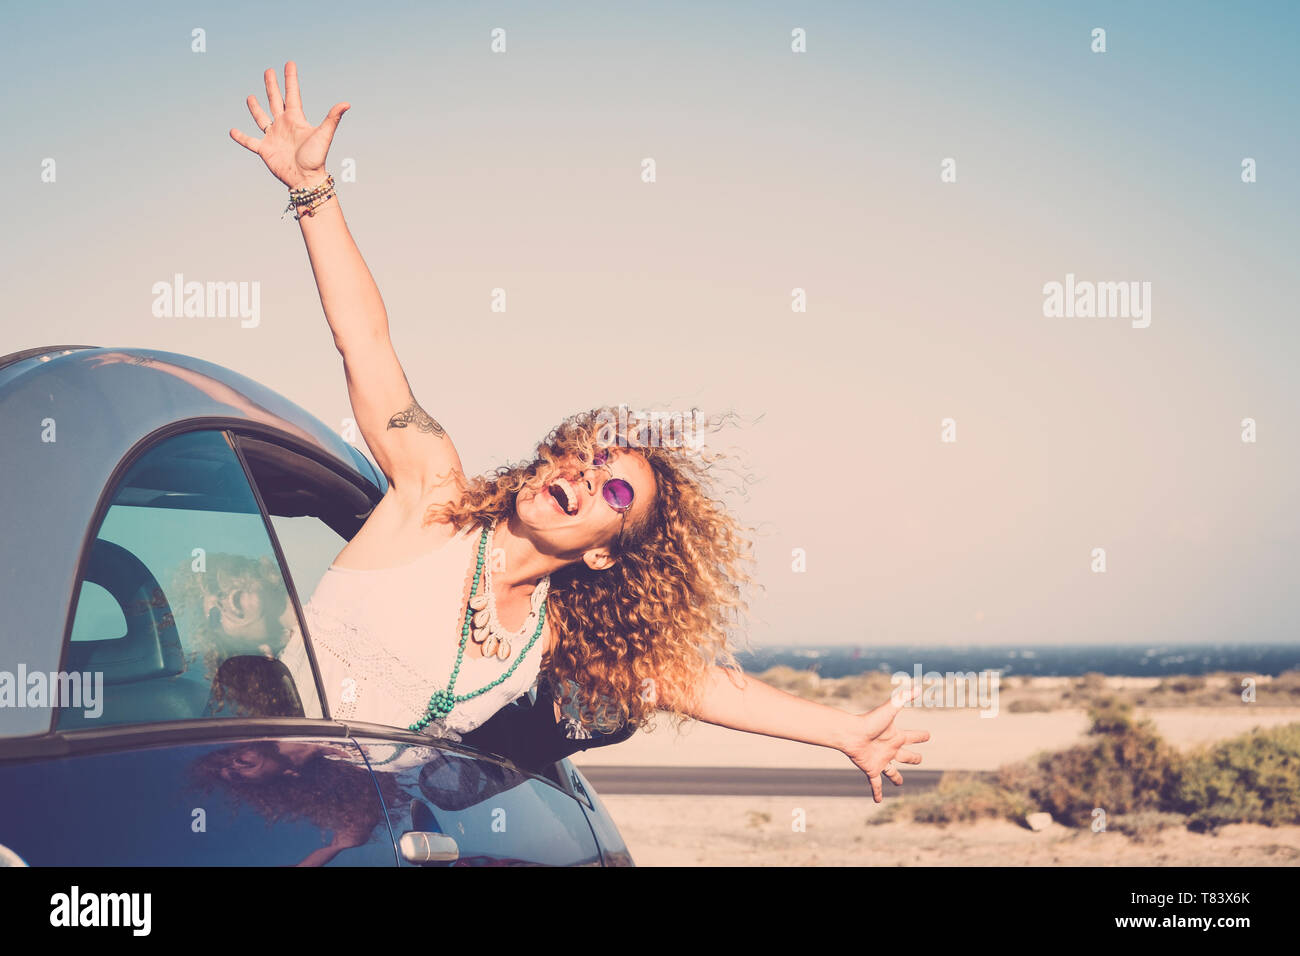 Happy woman enjoying life. One people middle aged with curly hair outdoor of the window car. Freedom concept and joy. Horizon over water Stock Photo